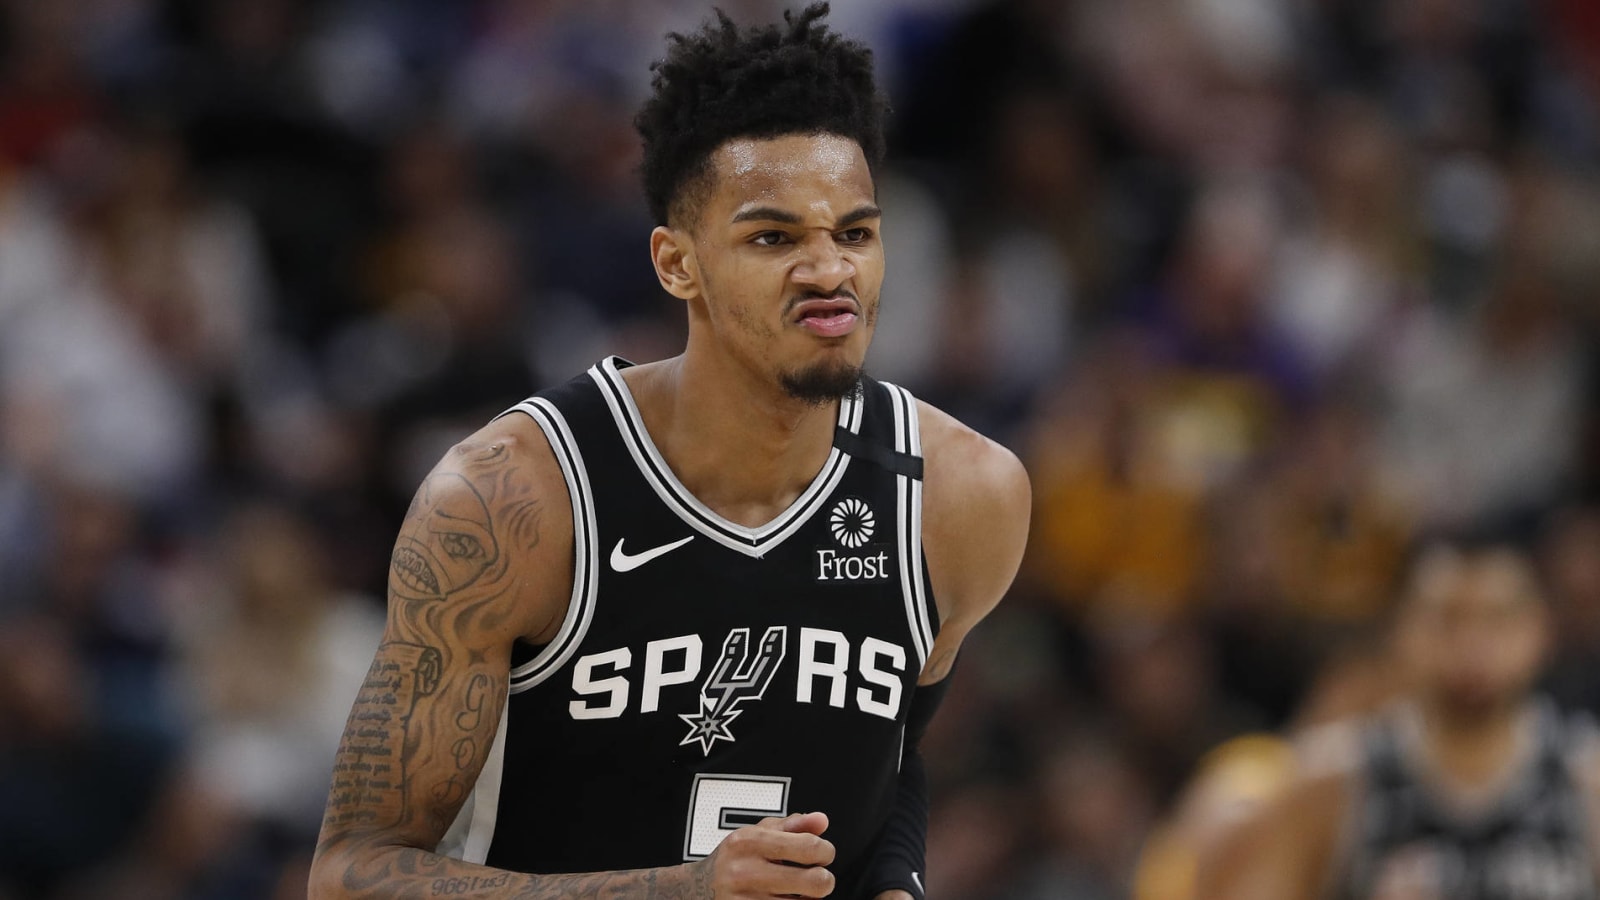 Watch: Dejounte Murray thrills neighborhood kids with driveway dunk session